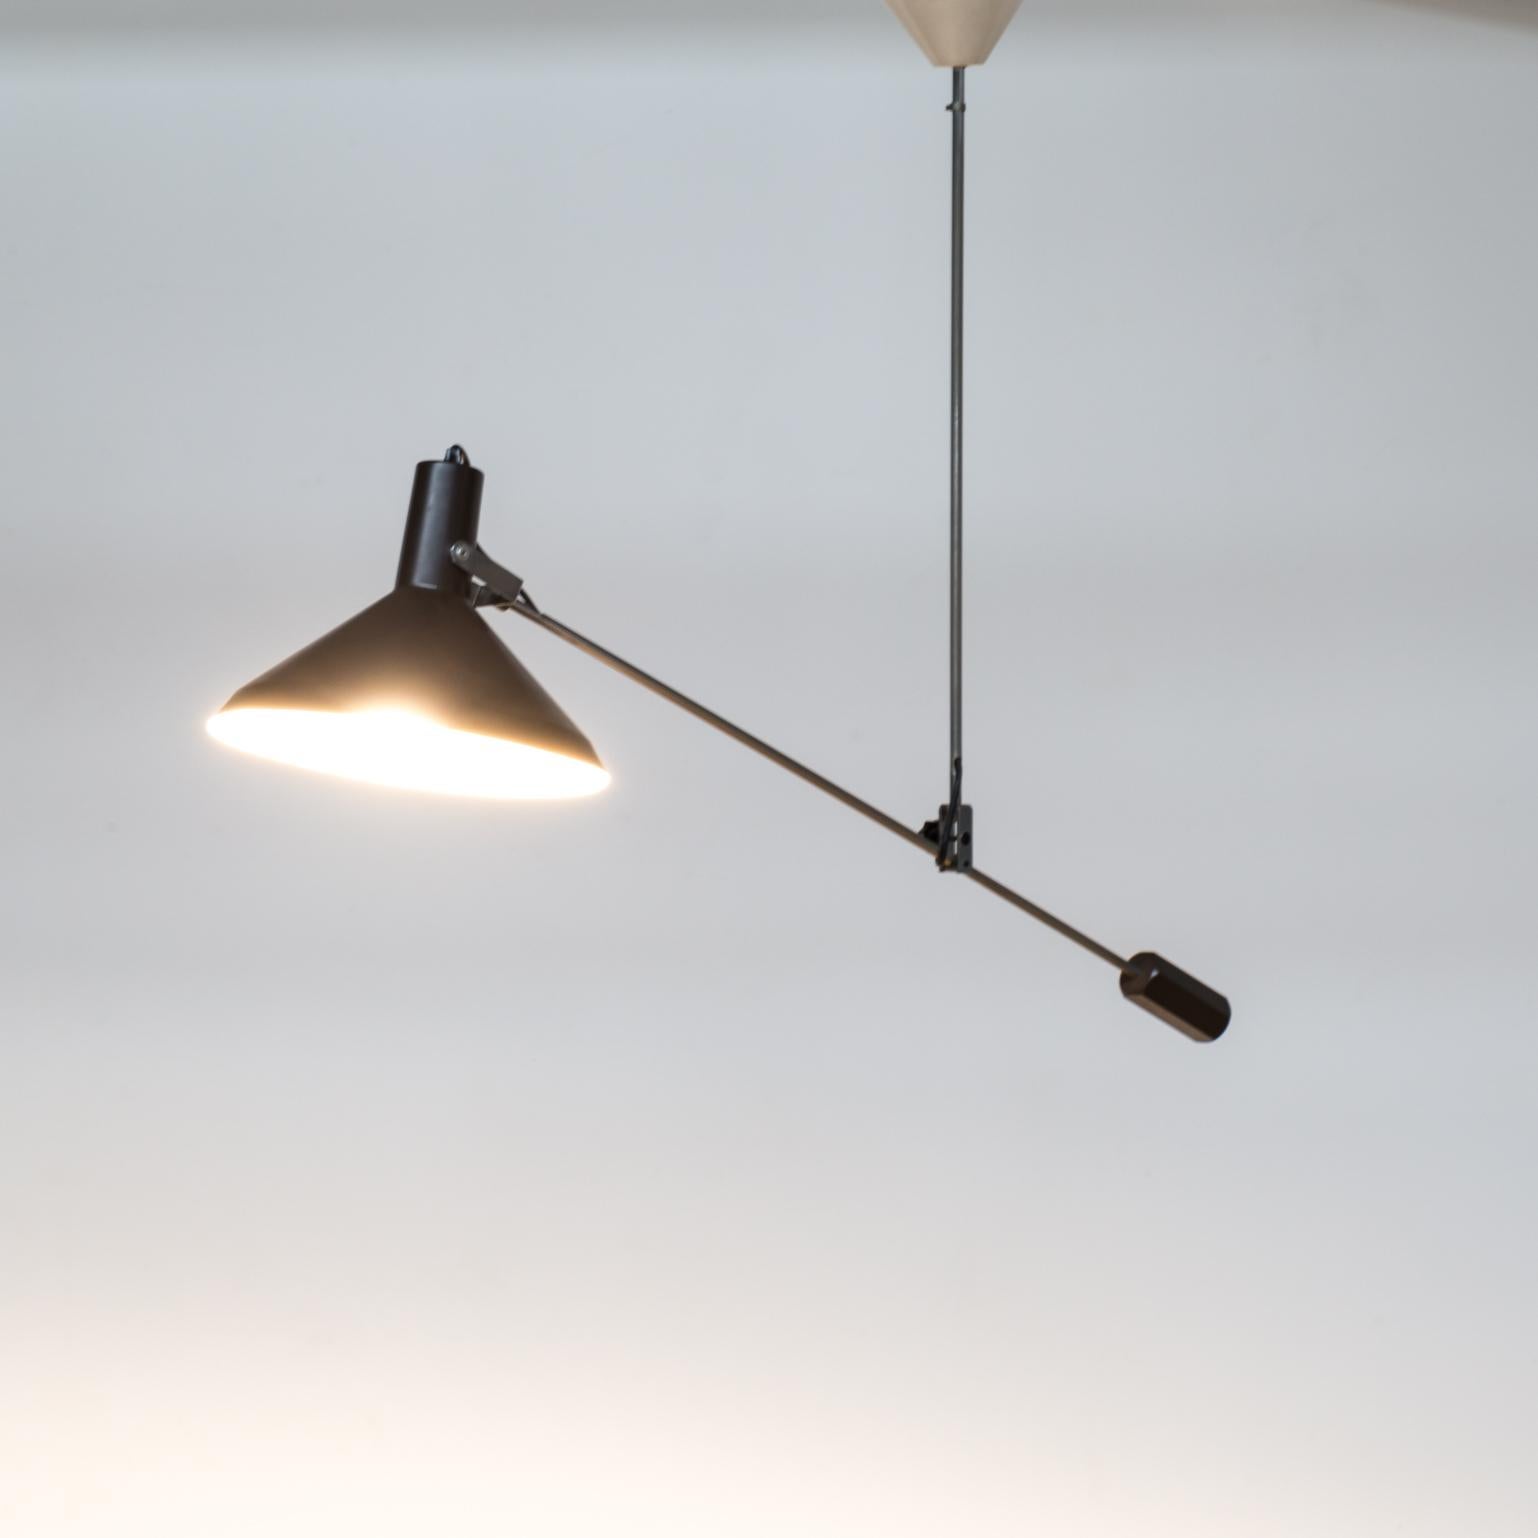 1970s Counterbalance Hanging Lamp In Good Condition For Sale In Amstelveen, Noord